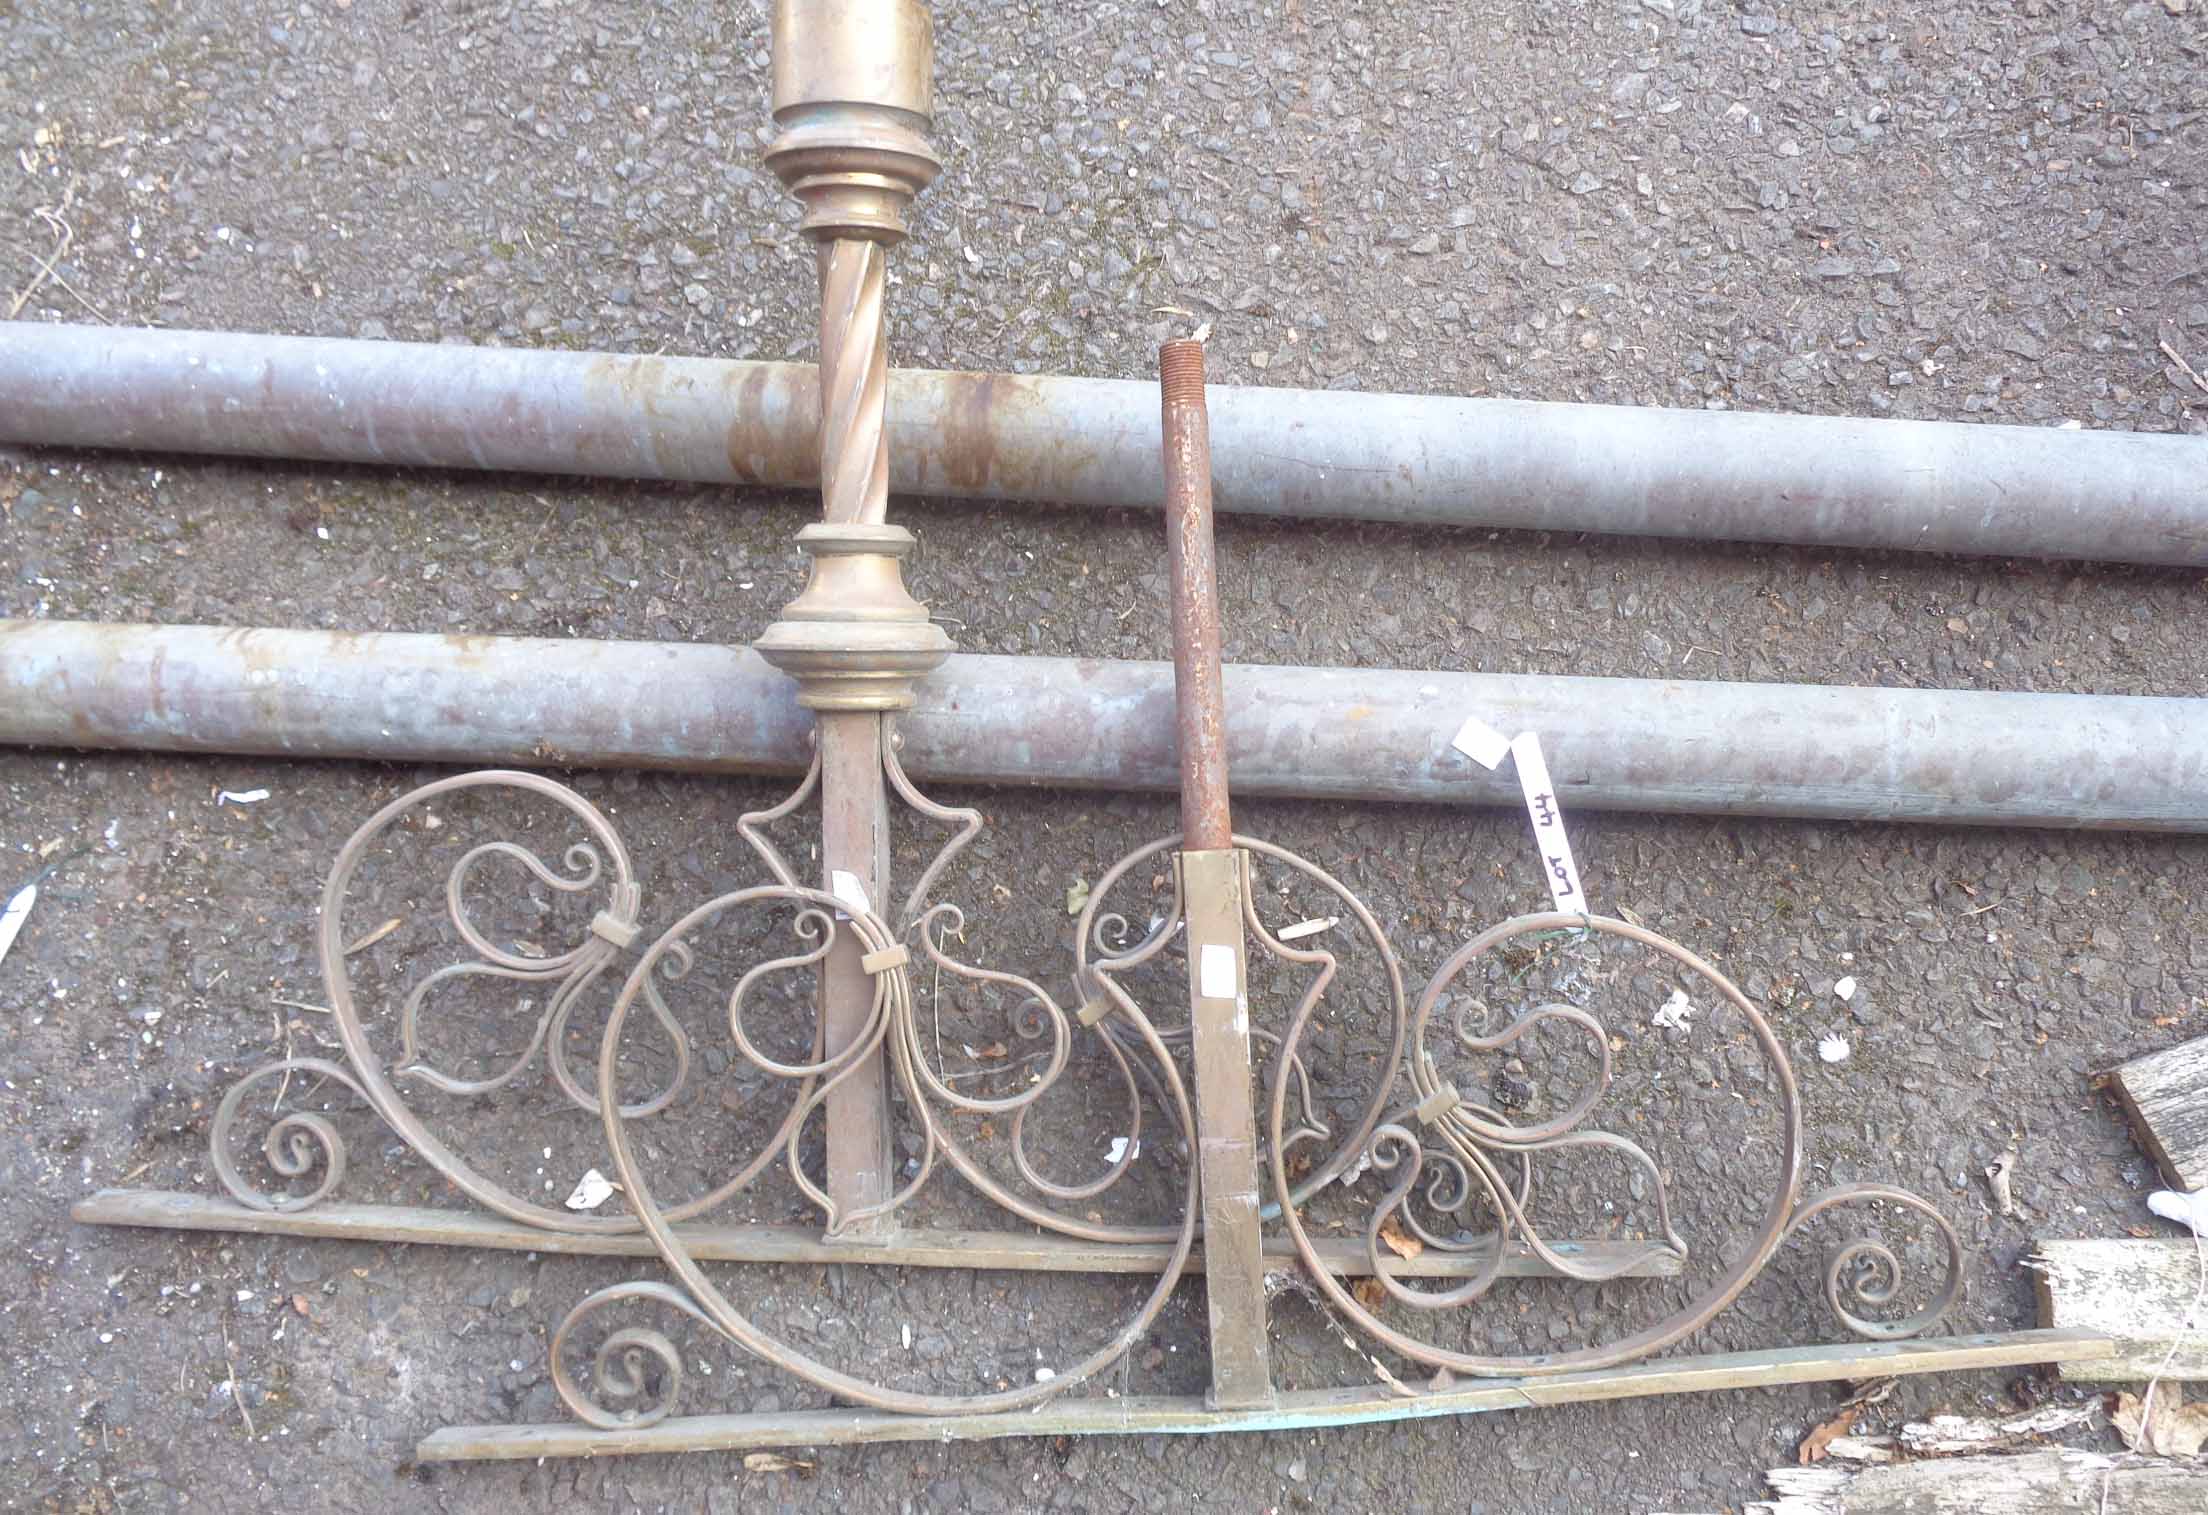 A large brass rod screen hanging pole with decorative finials